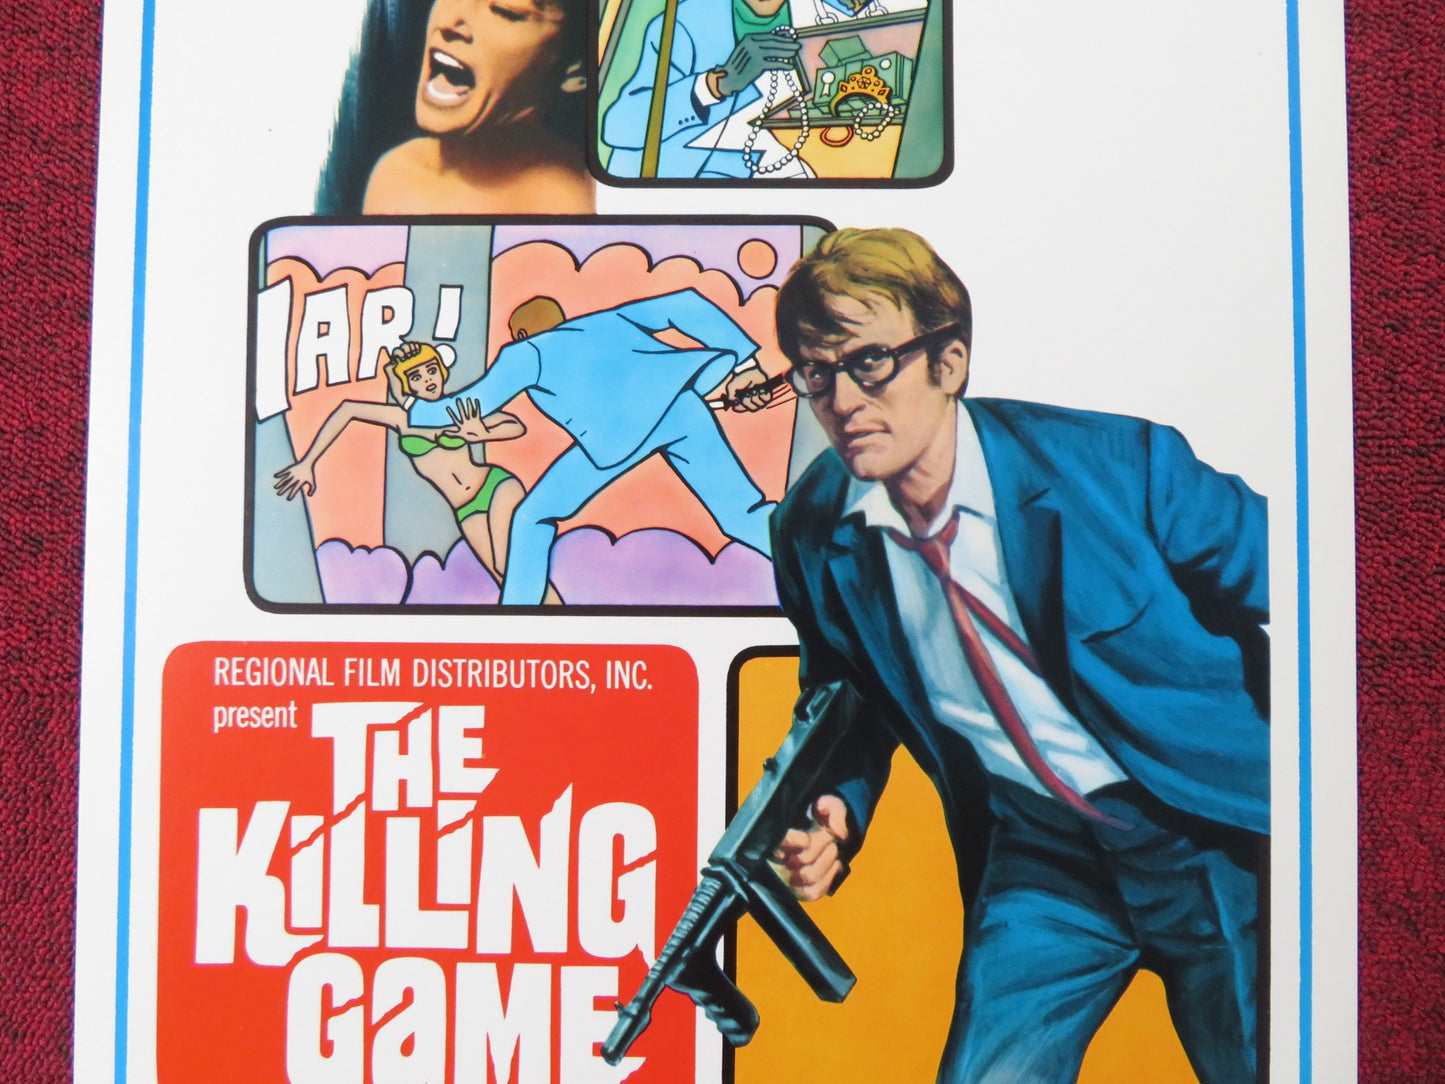 THE KILLING GAME US INSERT (14"x 36") POSTER JEAN-PIERRE CASSEL AUGER 1968